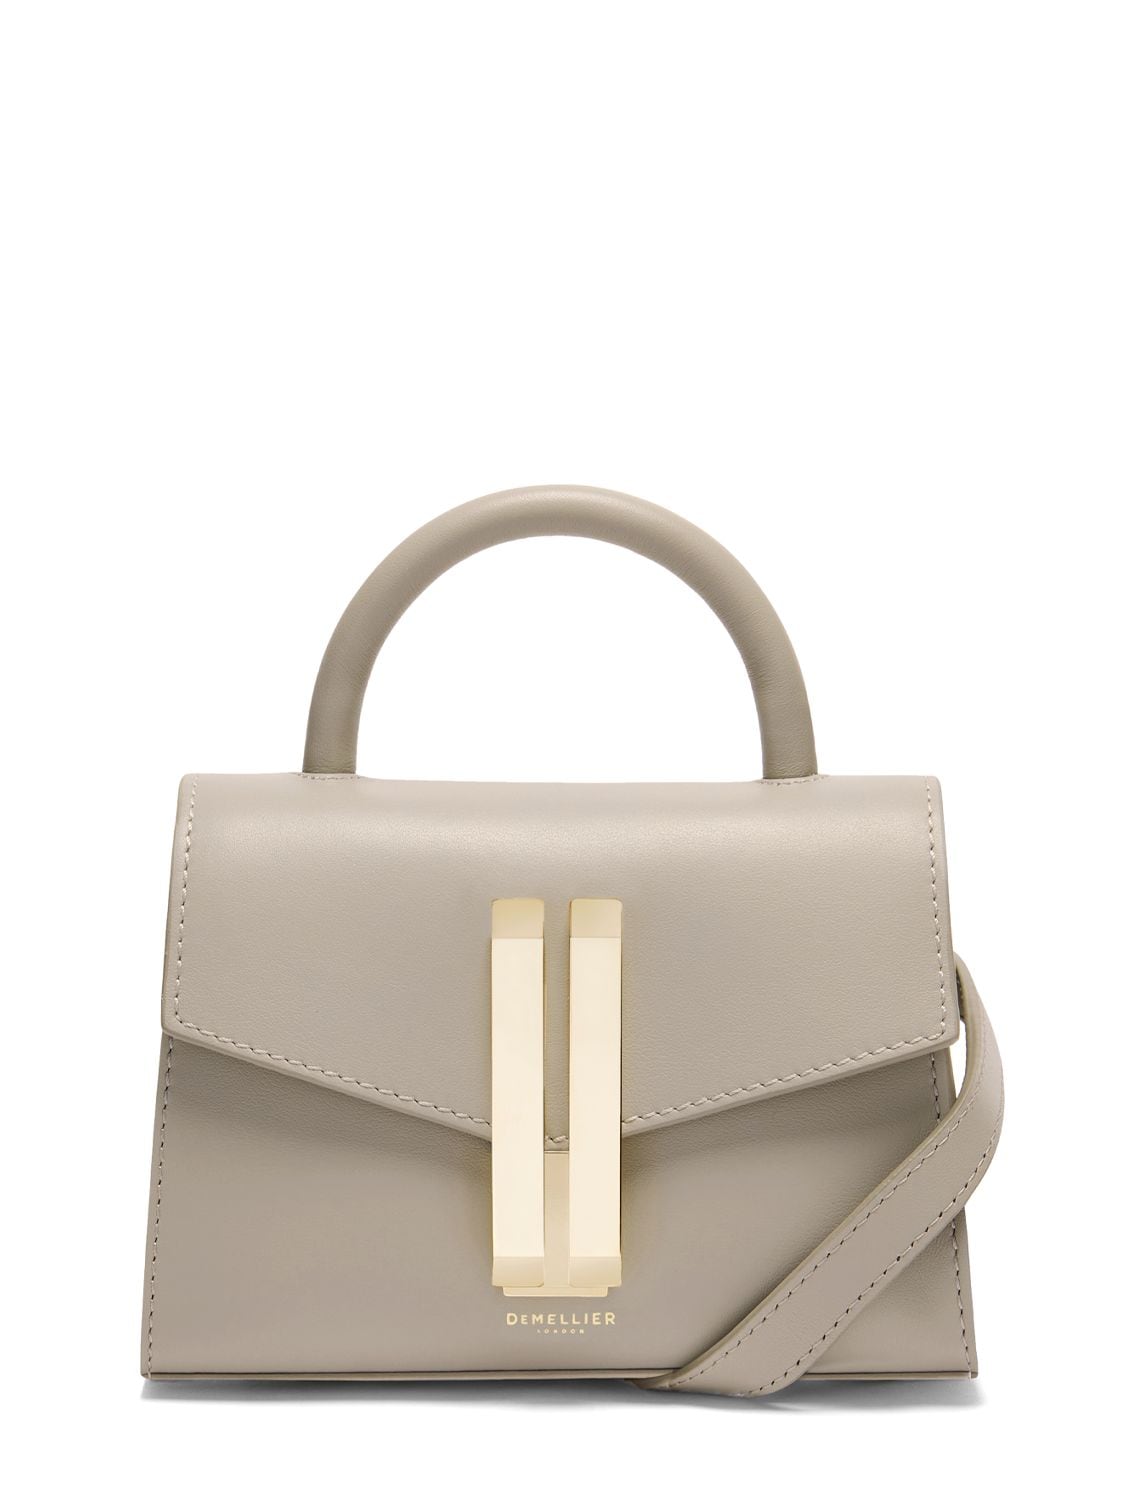 Demellier Nano Montreal Smooth Leather Bag In Graubraun